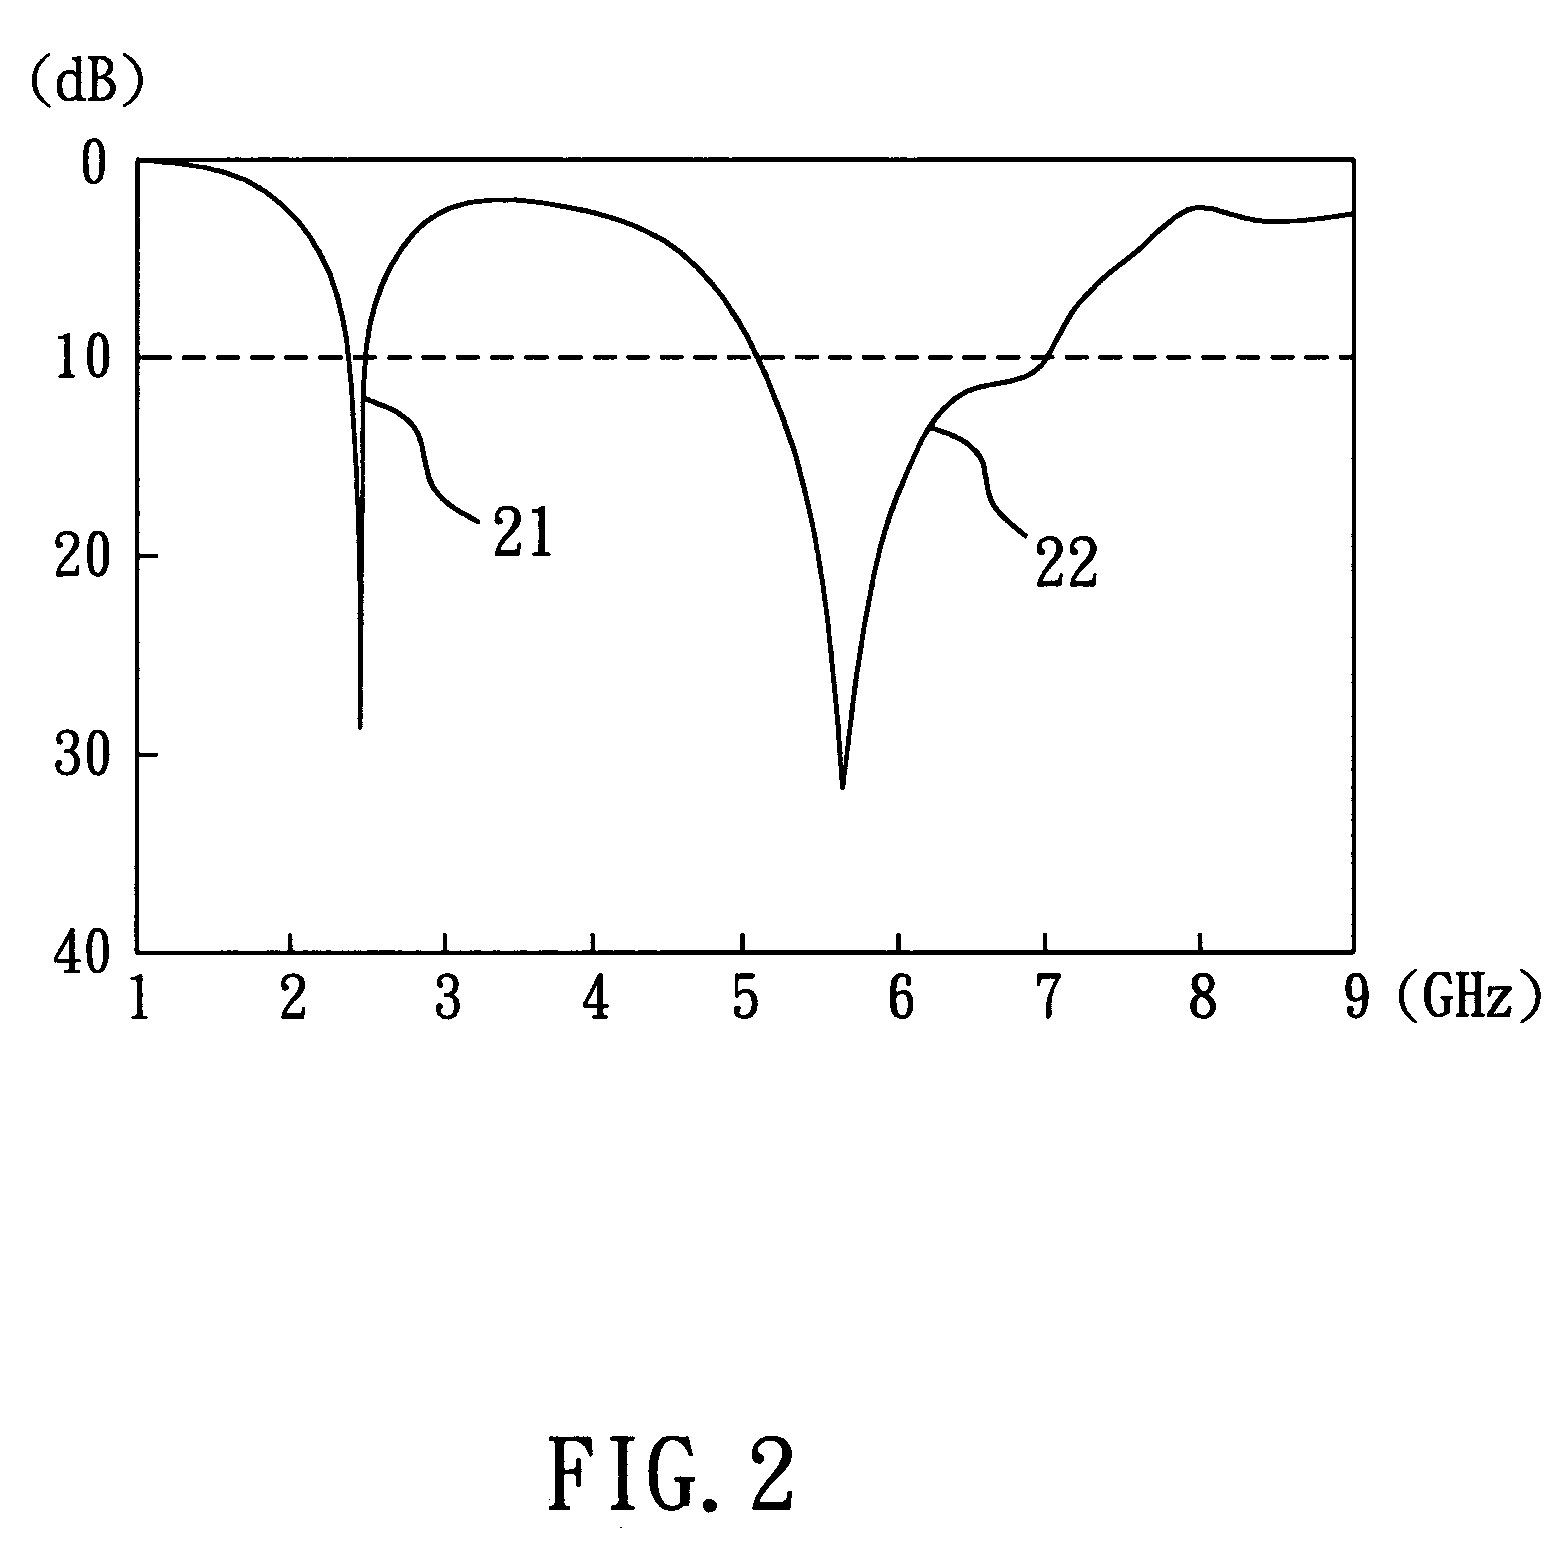 Dual-band inverted-F antenna with shorted parasitic elements